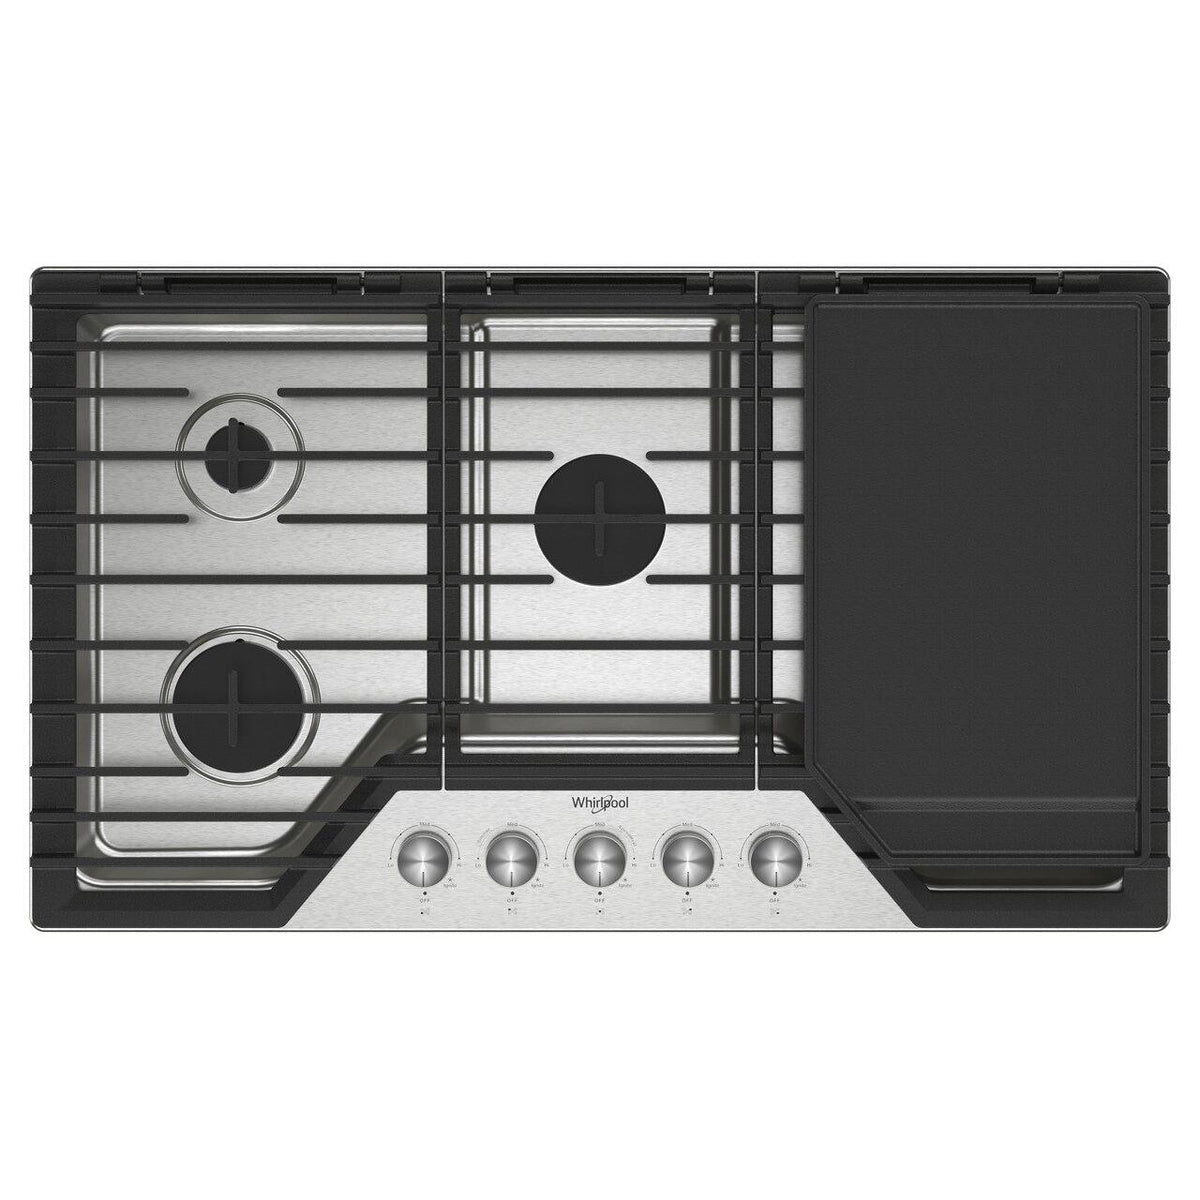 36-inch Built-in Gas Cooktop with 2-in-1 Hinged Grate to Griddle WCGK7536PS IMAGE 1